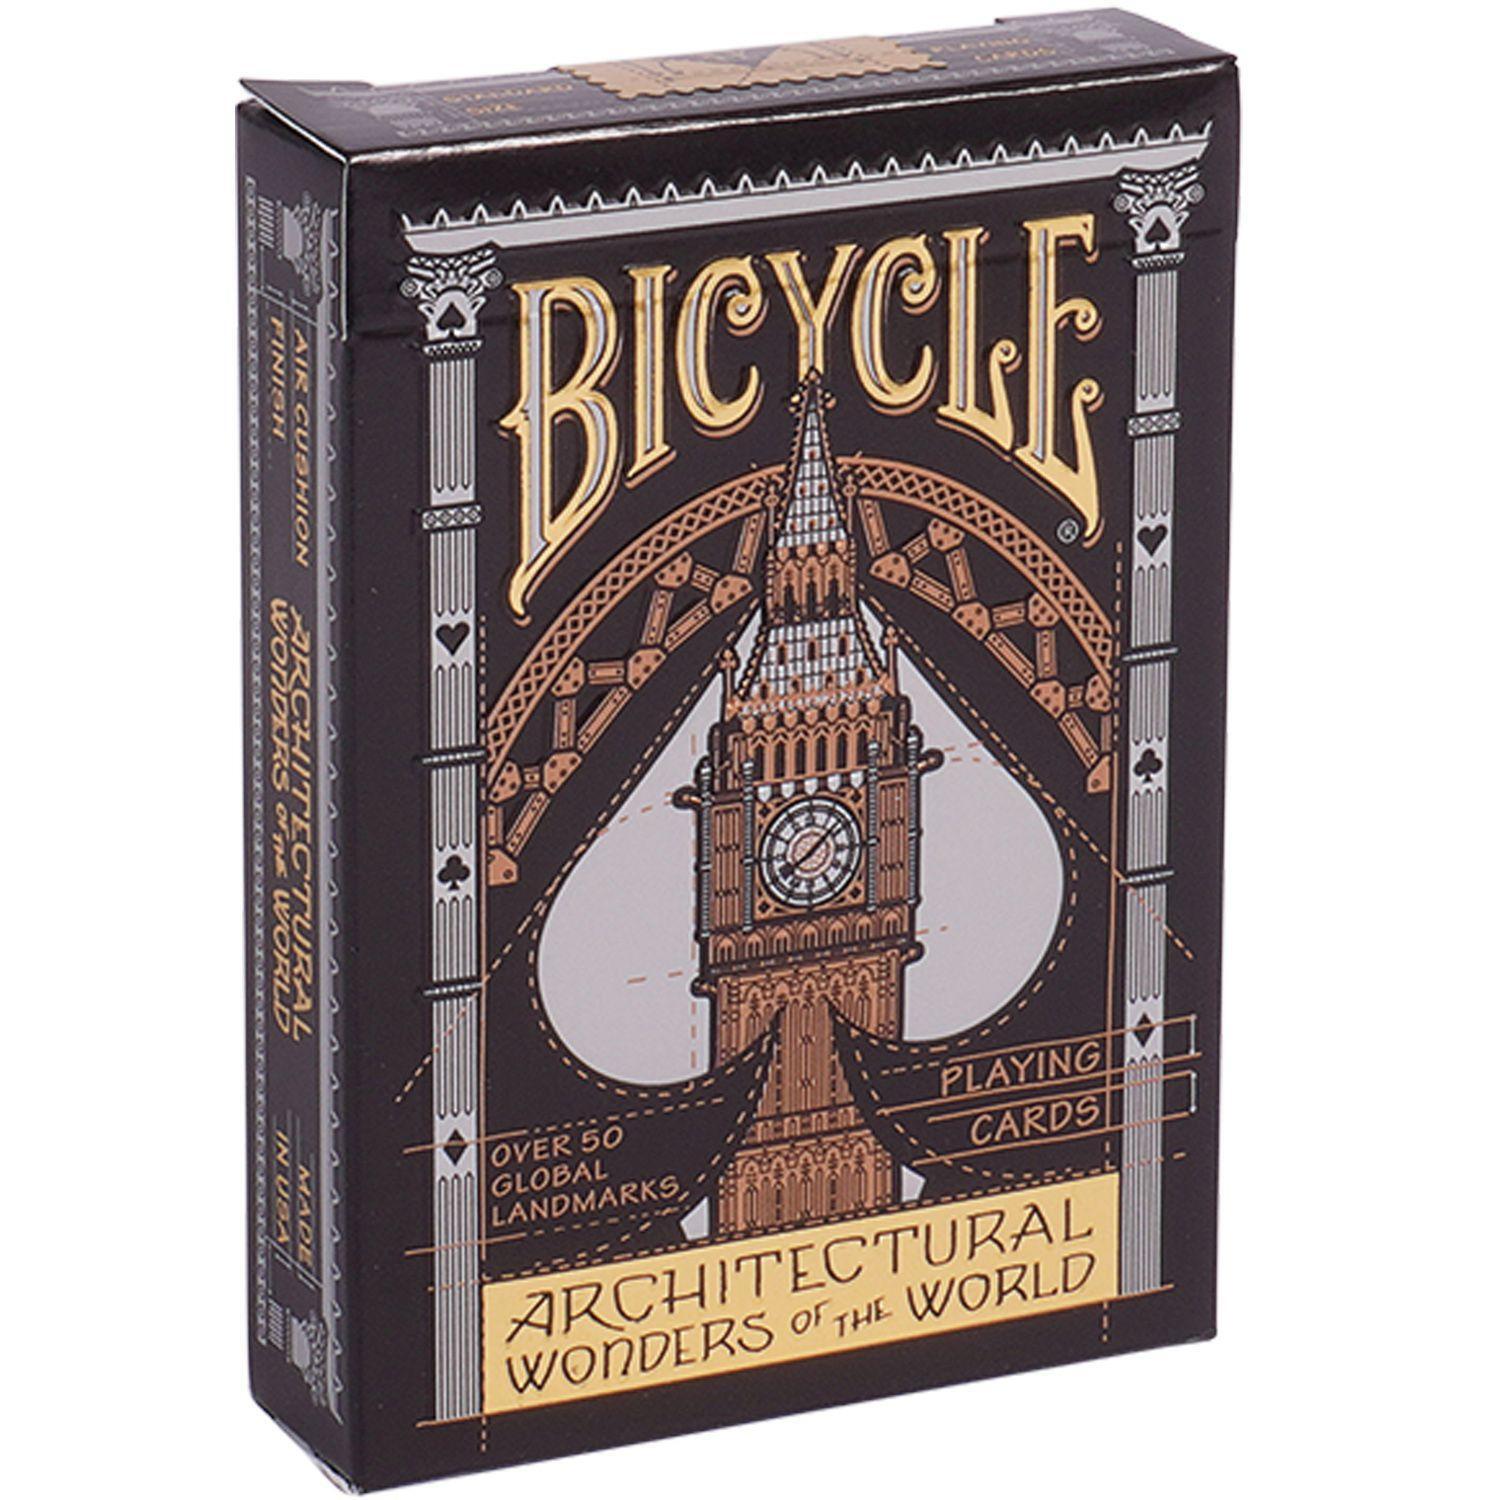 Bild: 73854025413 | Bicycle Architectural Wonders of the World | Company | Spiel | 2021